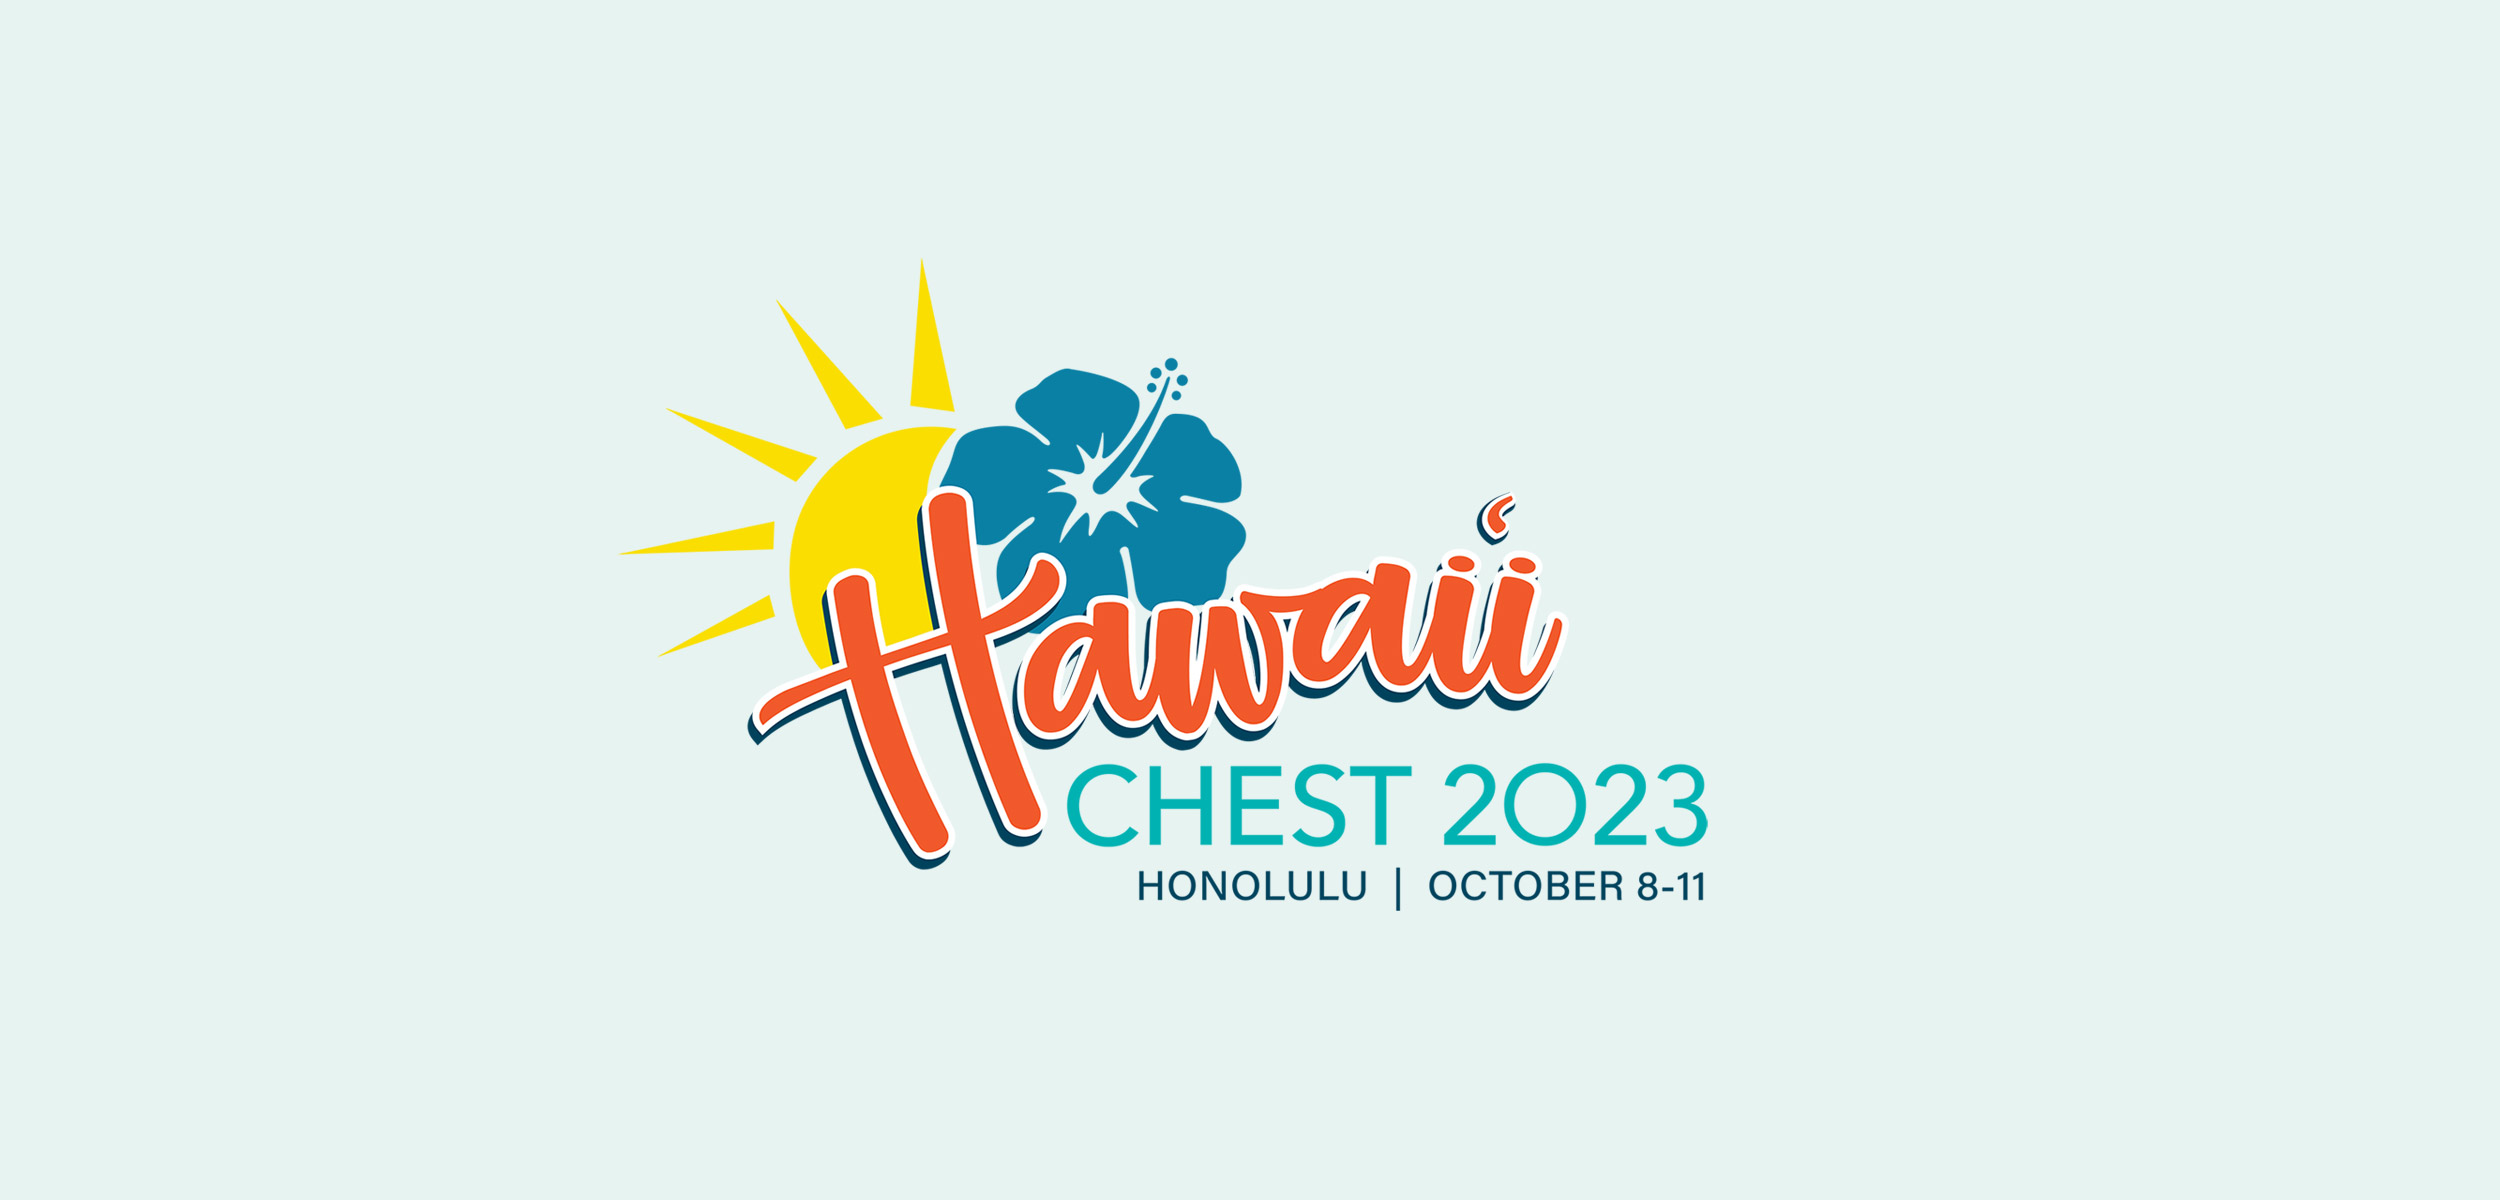 Chest physicians are invited to "grow, connect and be inspired" at CHEST 2023 in Honolulu.